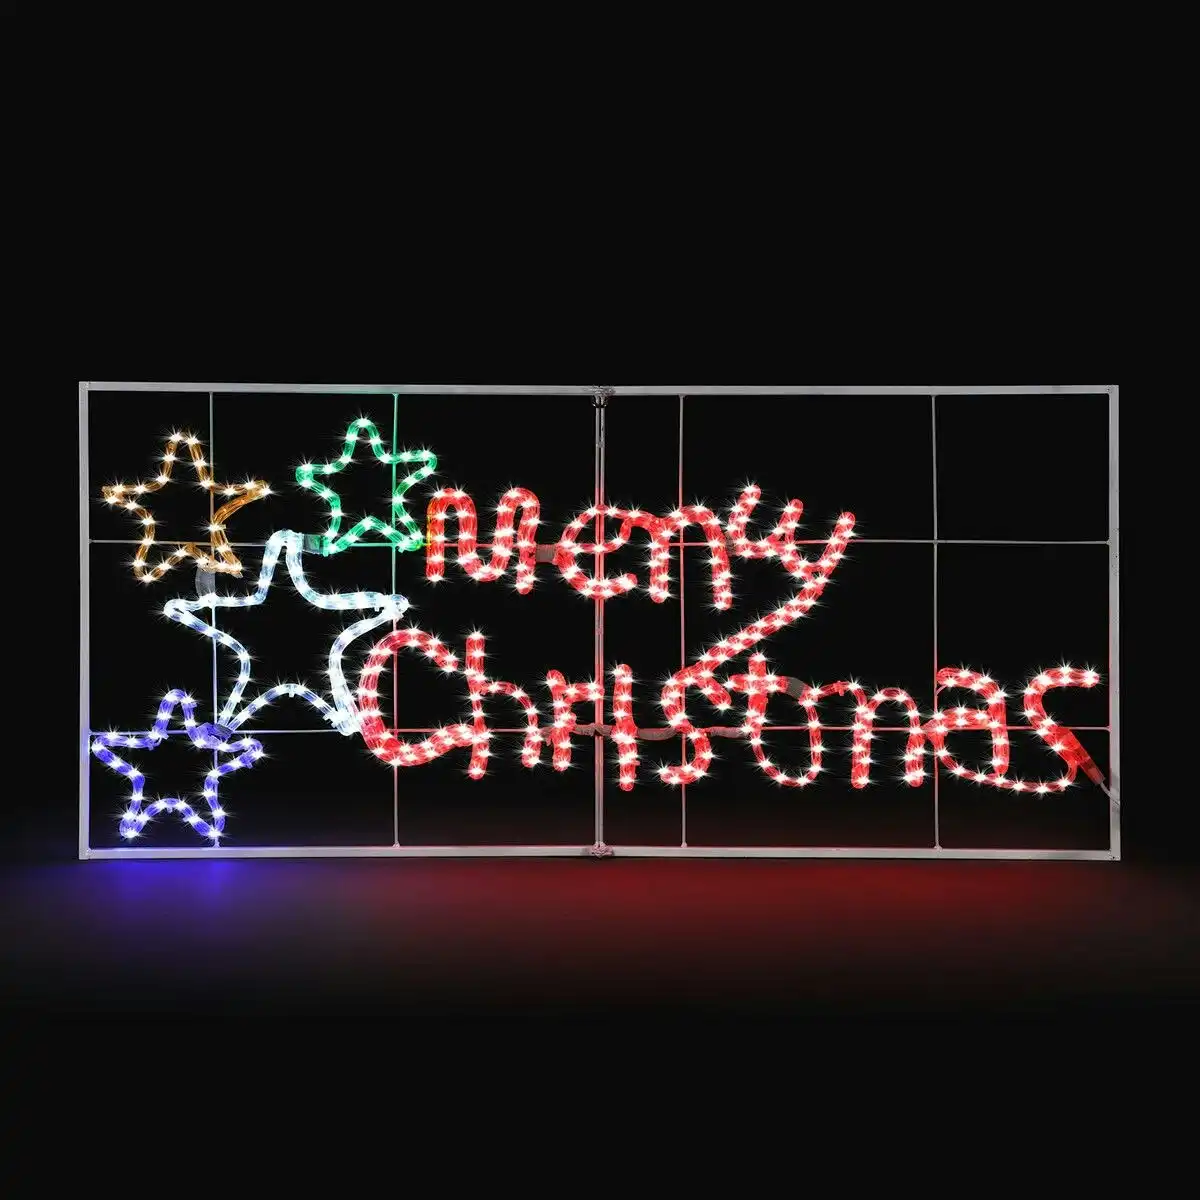 Solight  Merry Christmas Light Xmas LED Rope Strip Decoration Holiday Ornament Indoor Outdoor IP65 130x60cm XL Size